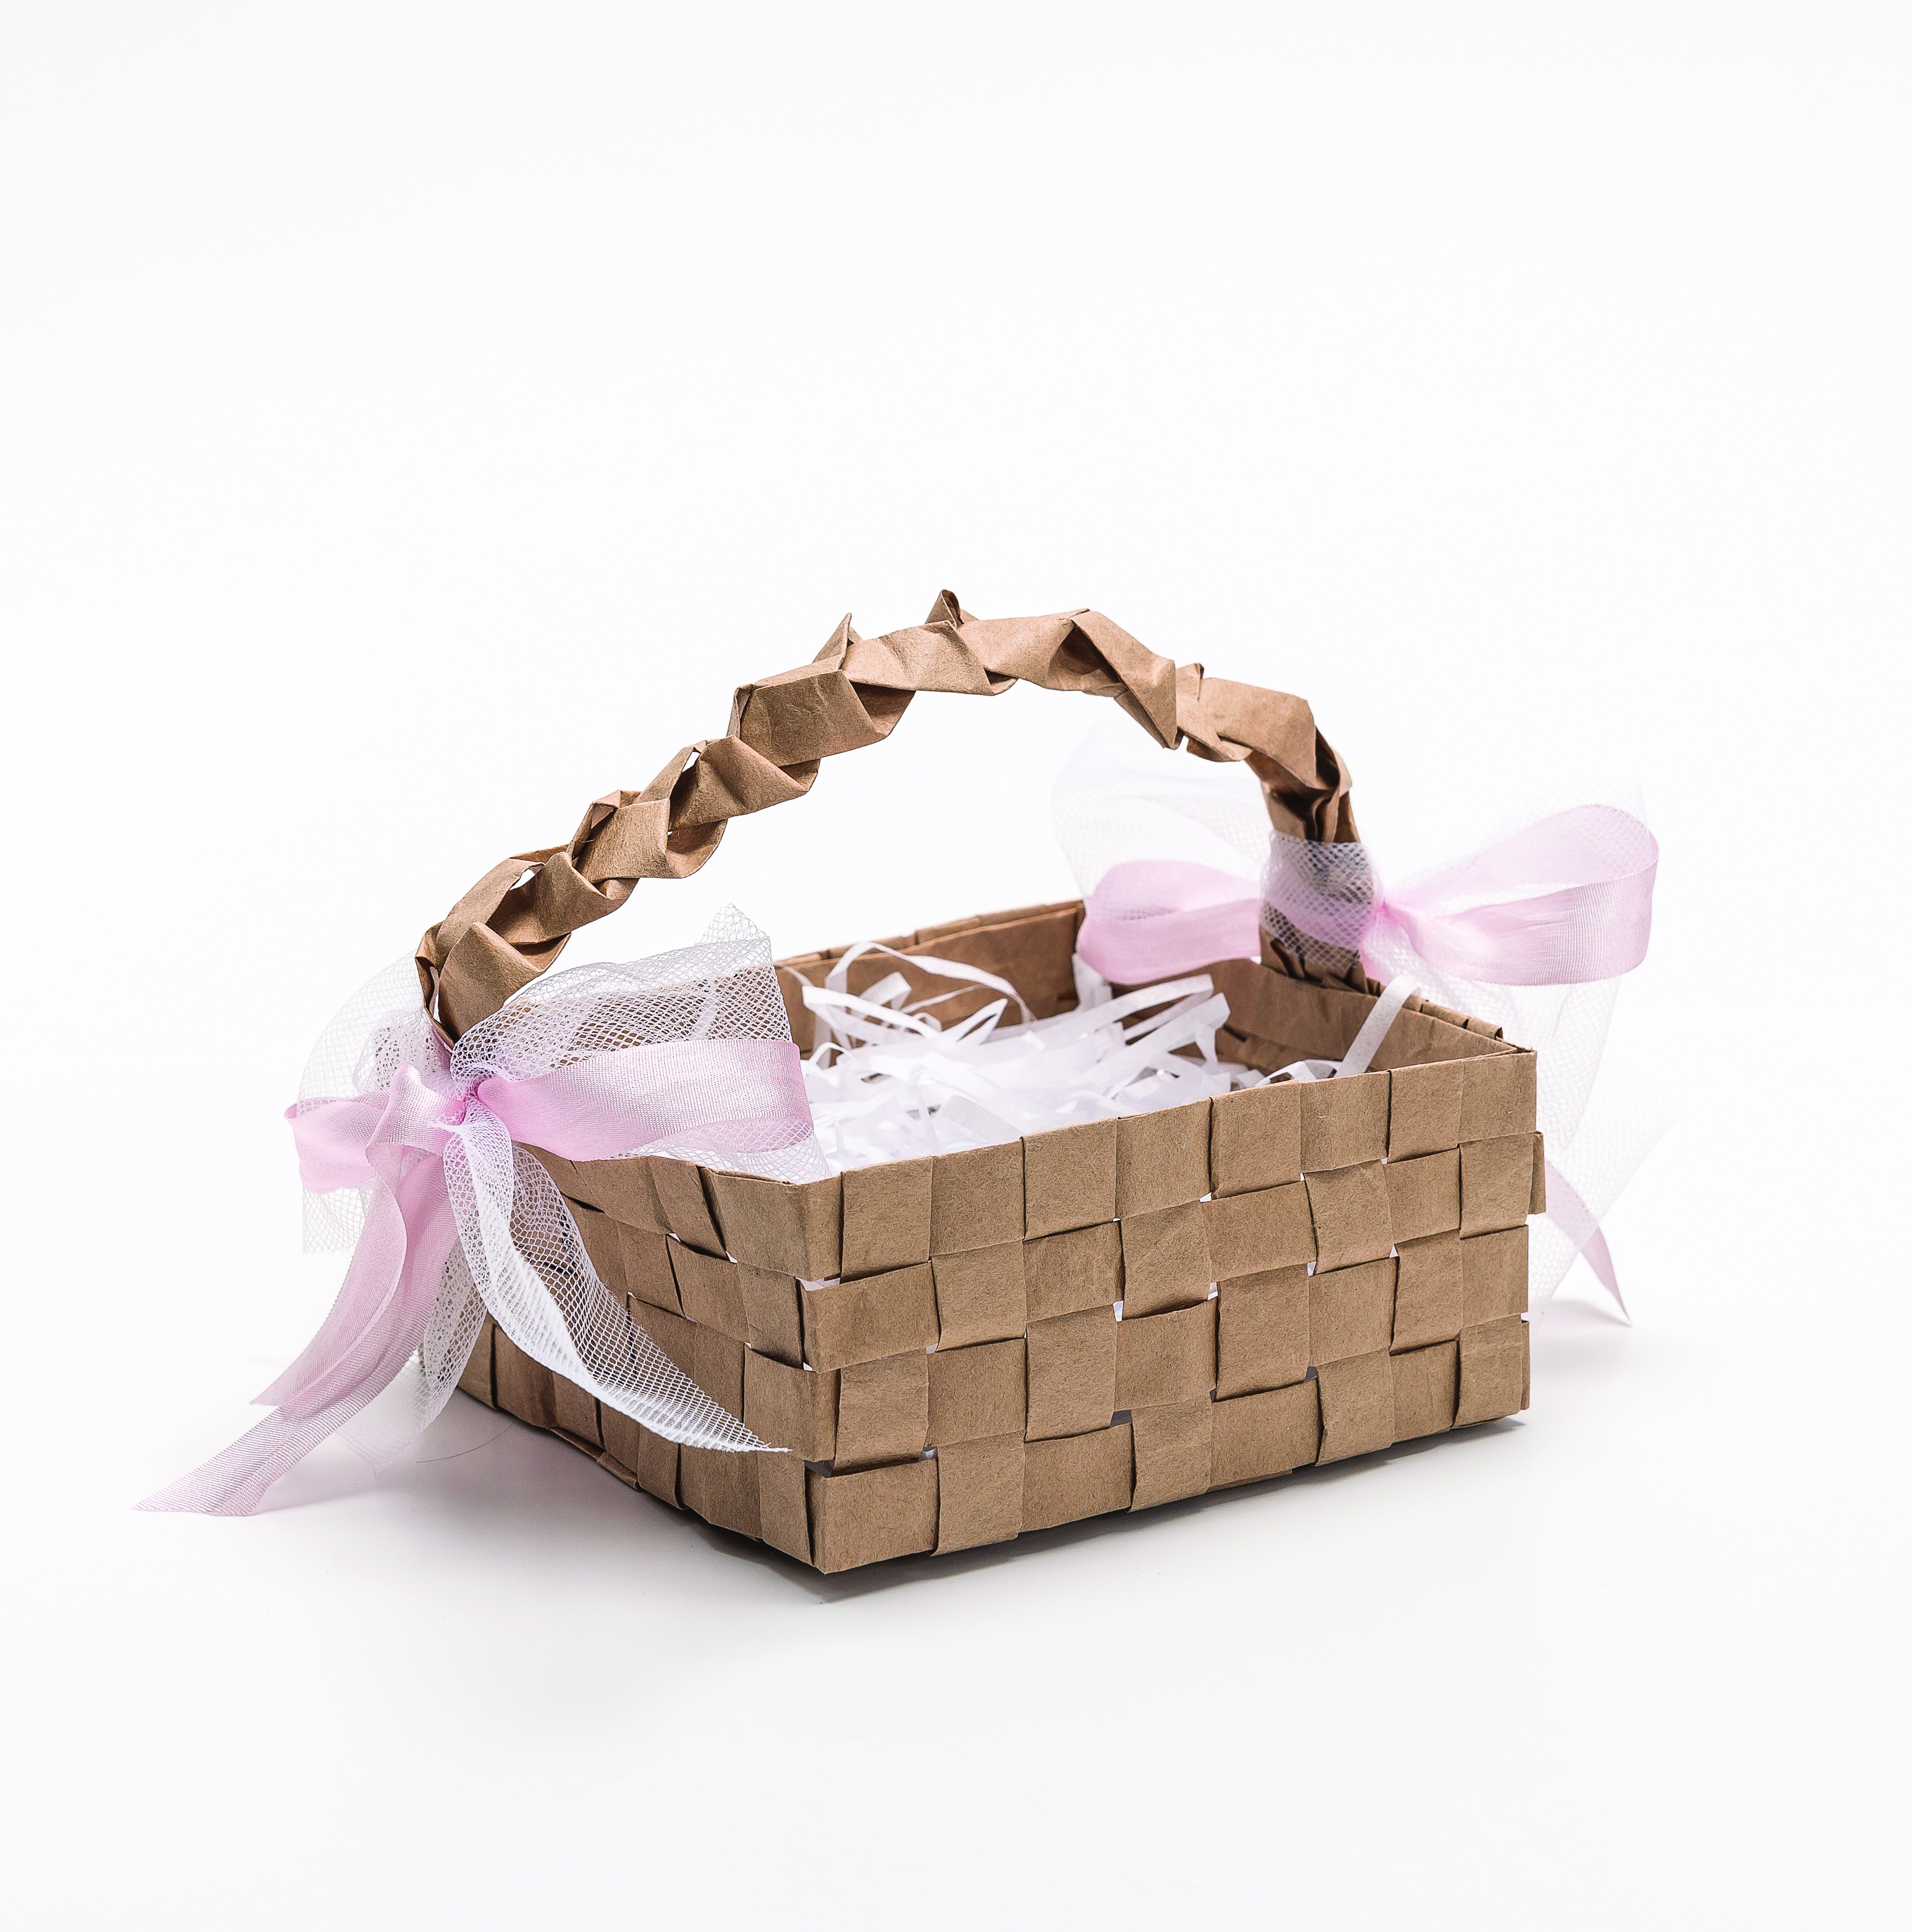 How to make an Easter basket – step 6